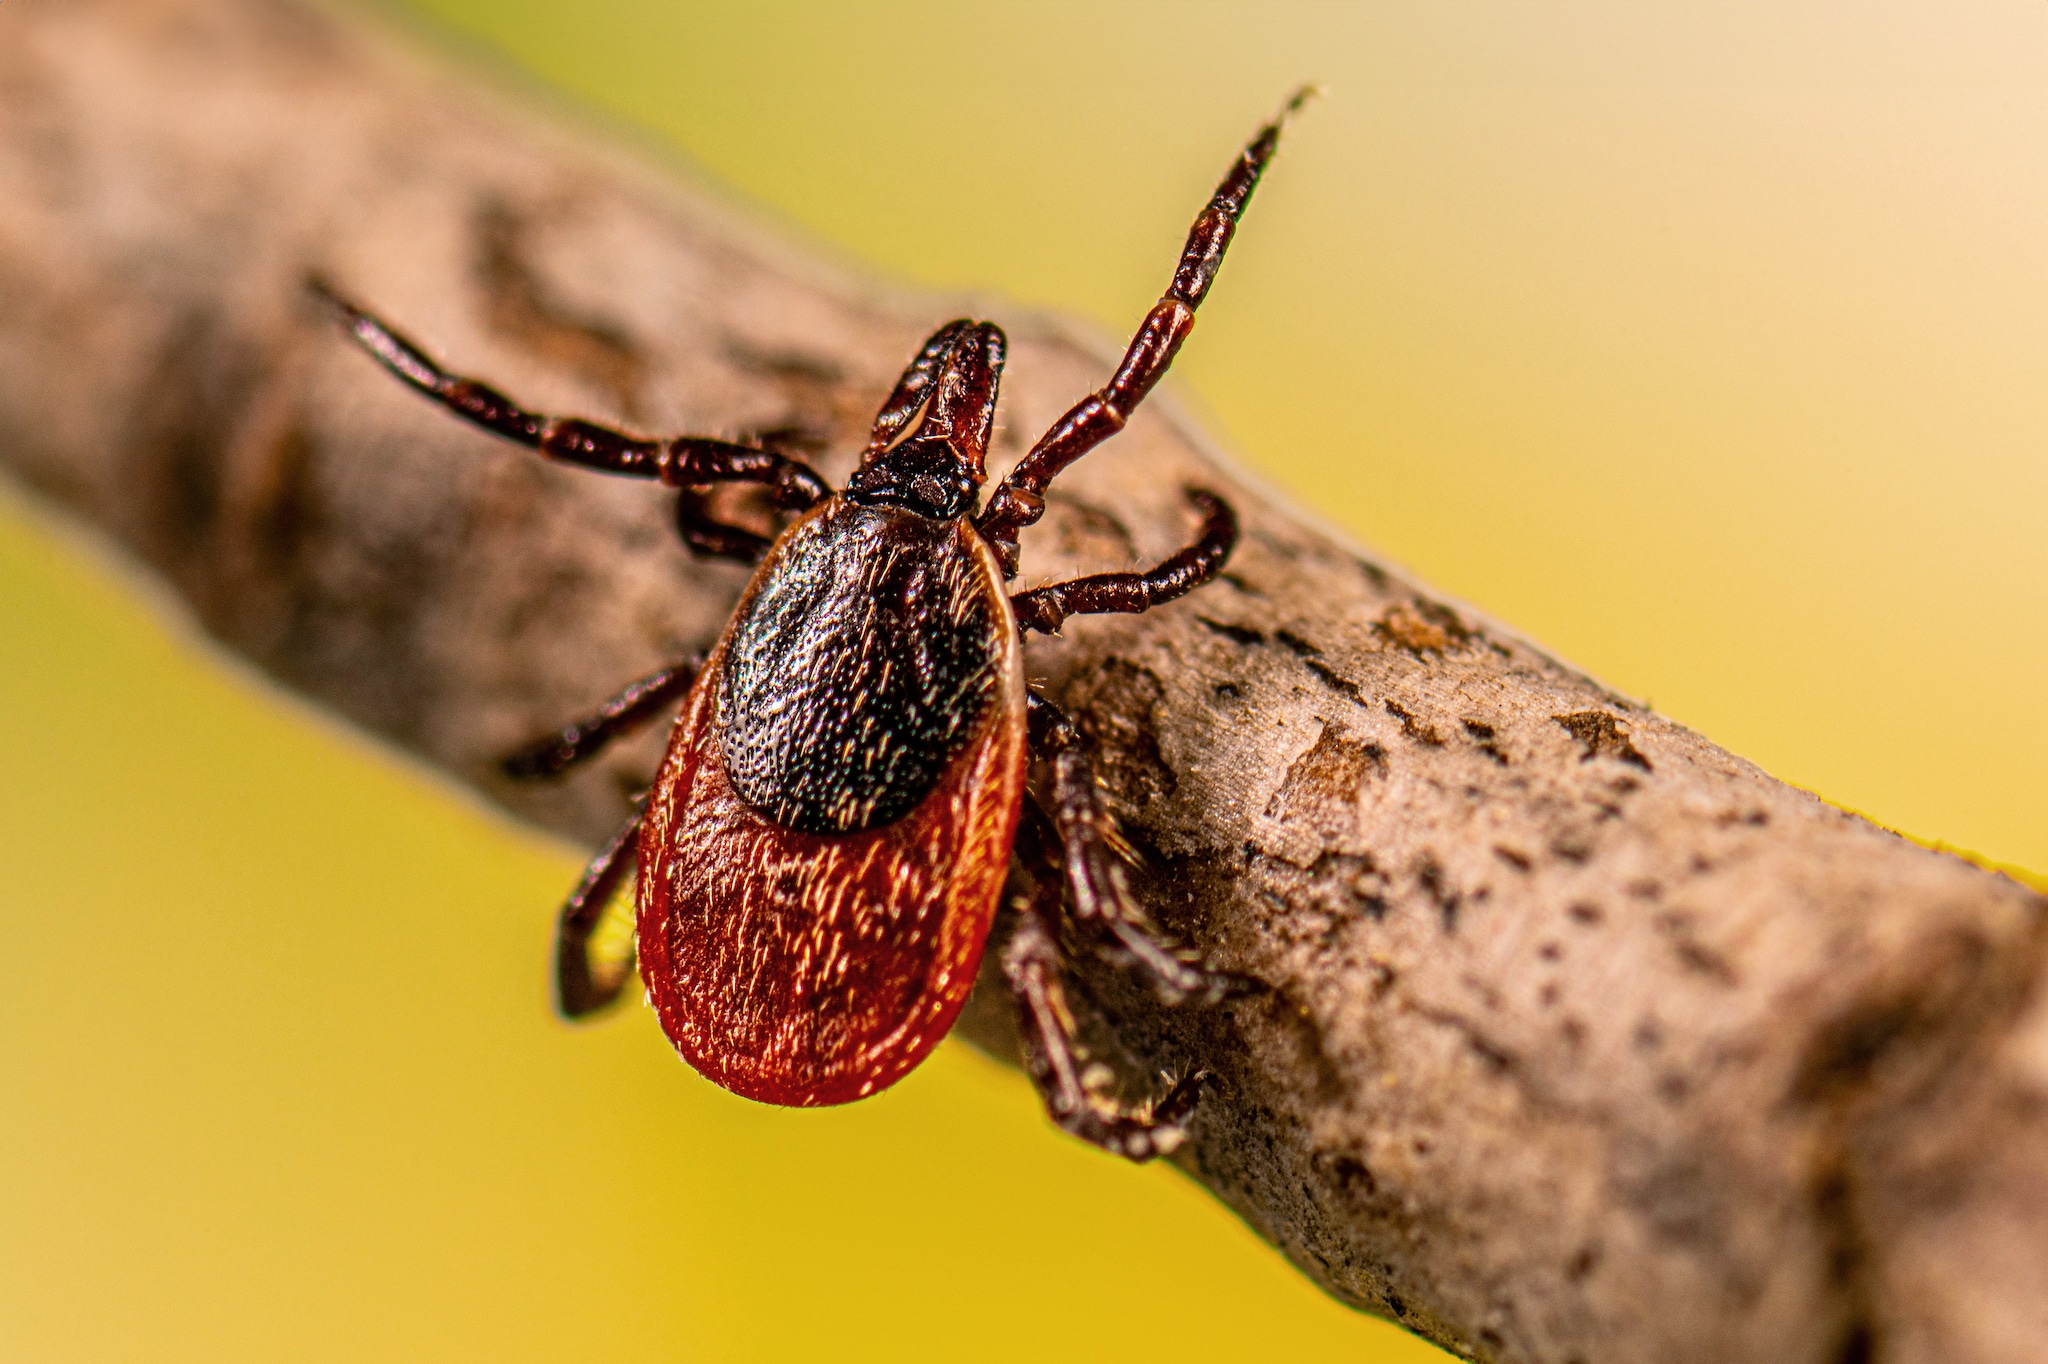 Ixodes scapularis on a tree branch.